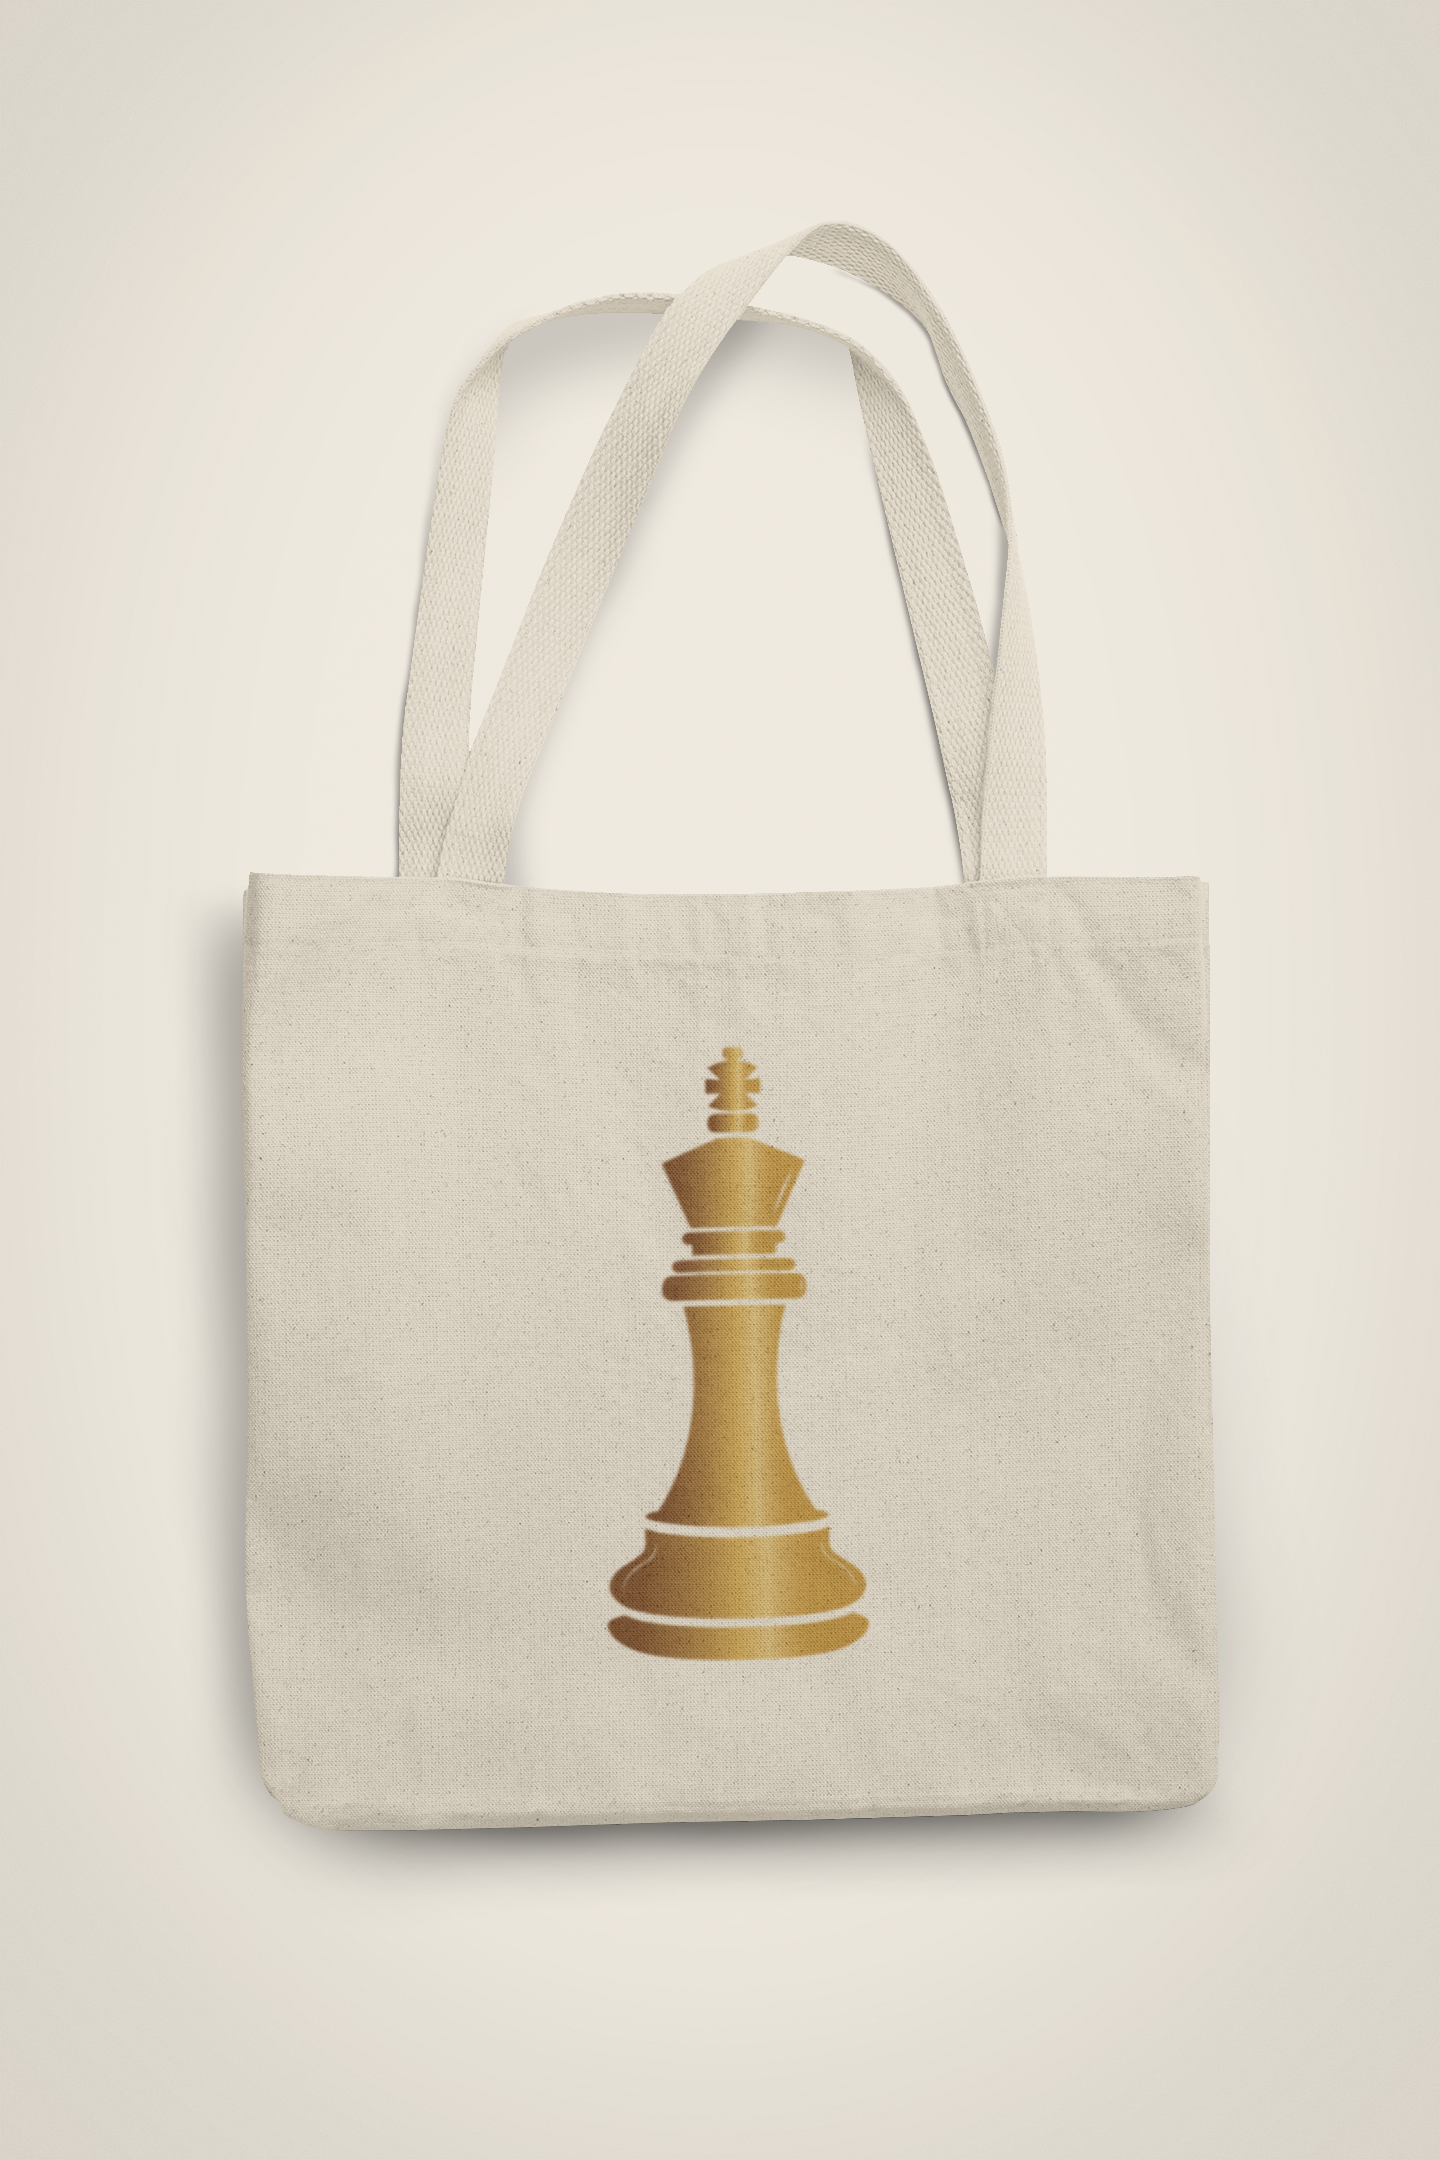 TOTE - CHESS KING